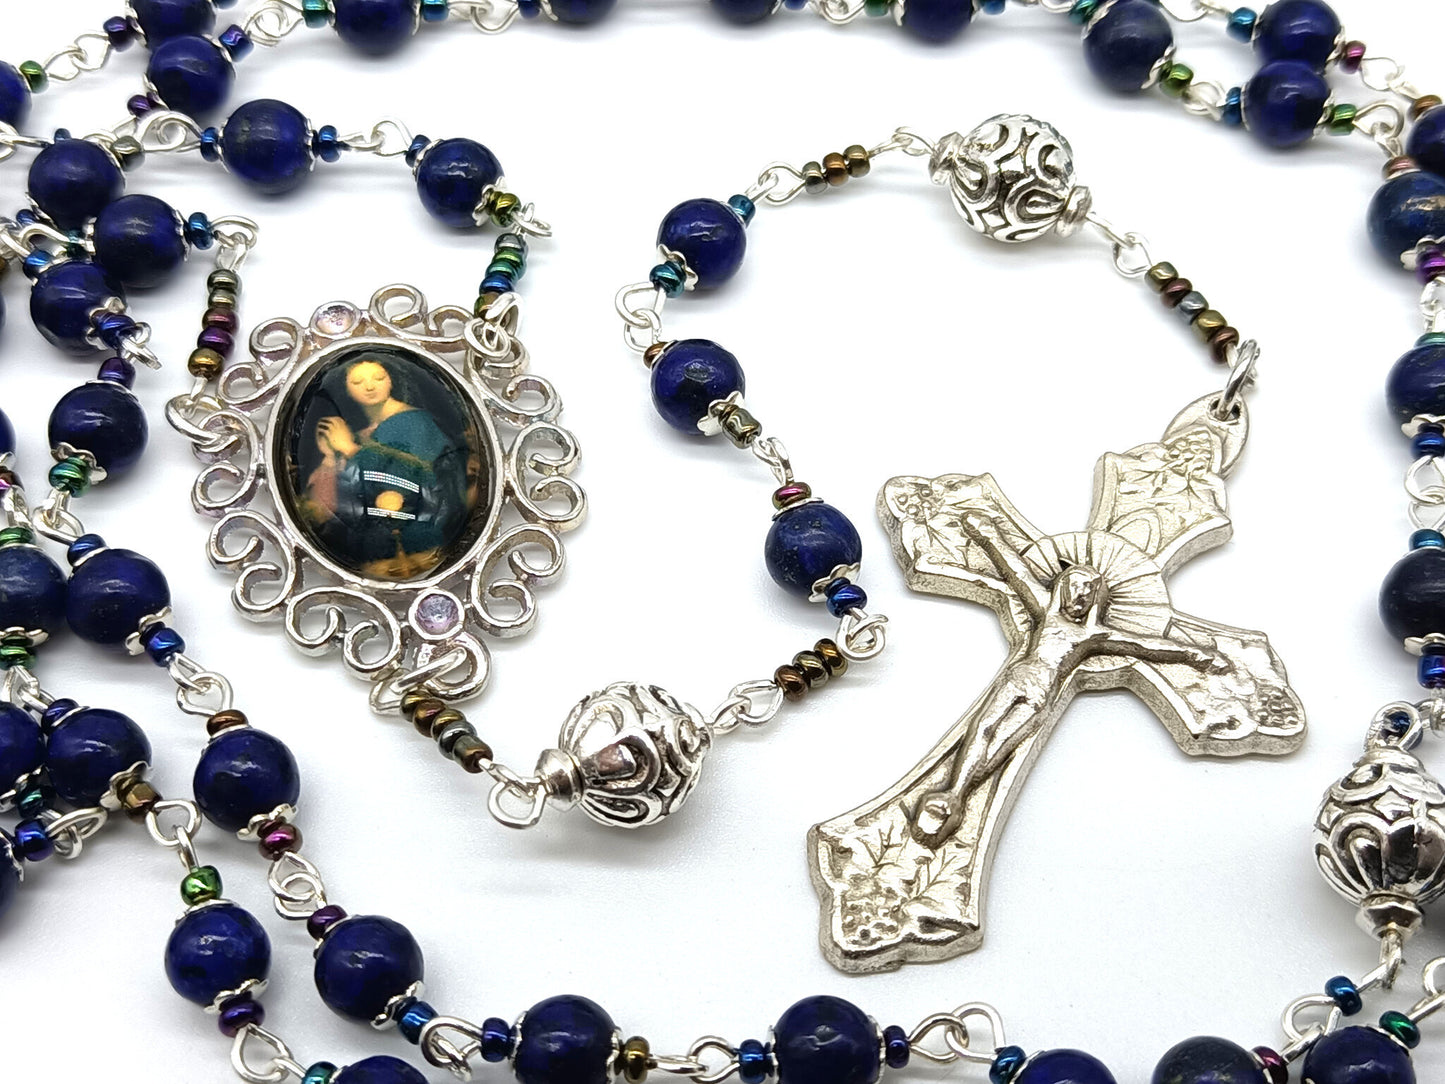 Lapis Lazuli unique rosary beads with silver crucifix, pater beads and Virgin Mary picture centre medal.